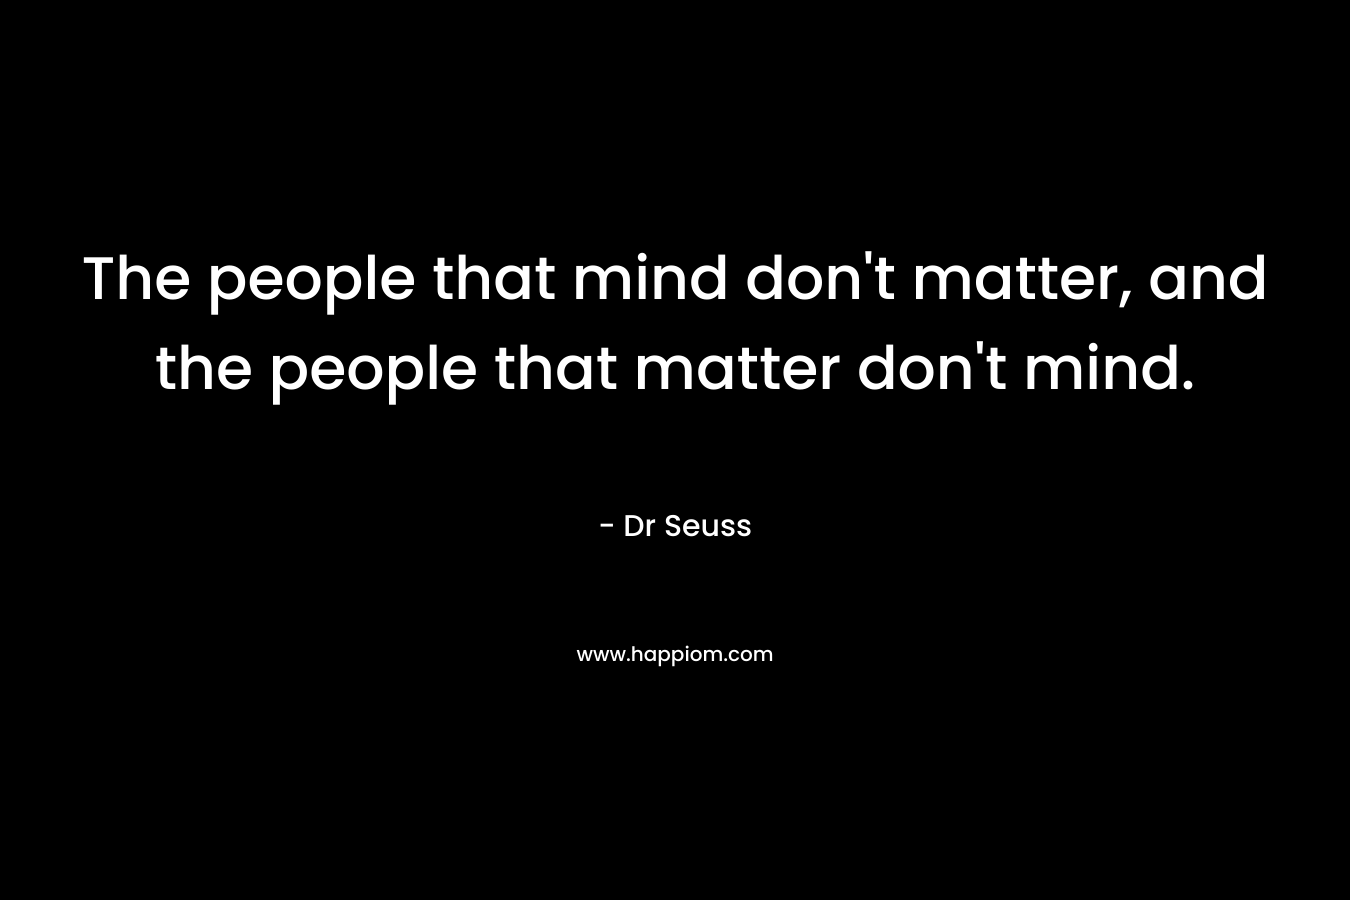 The people that mind don't matter, and the people that matter don't mind.